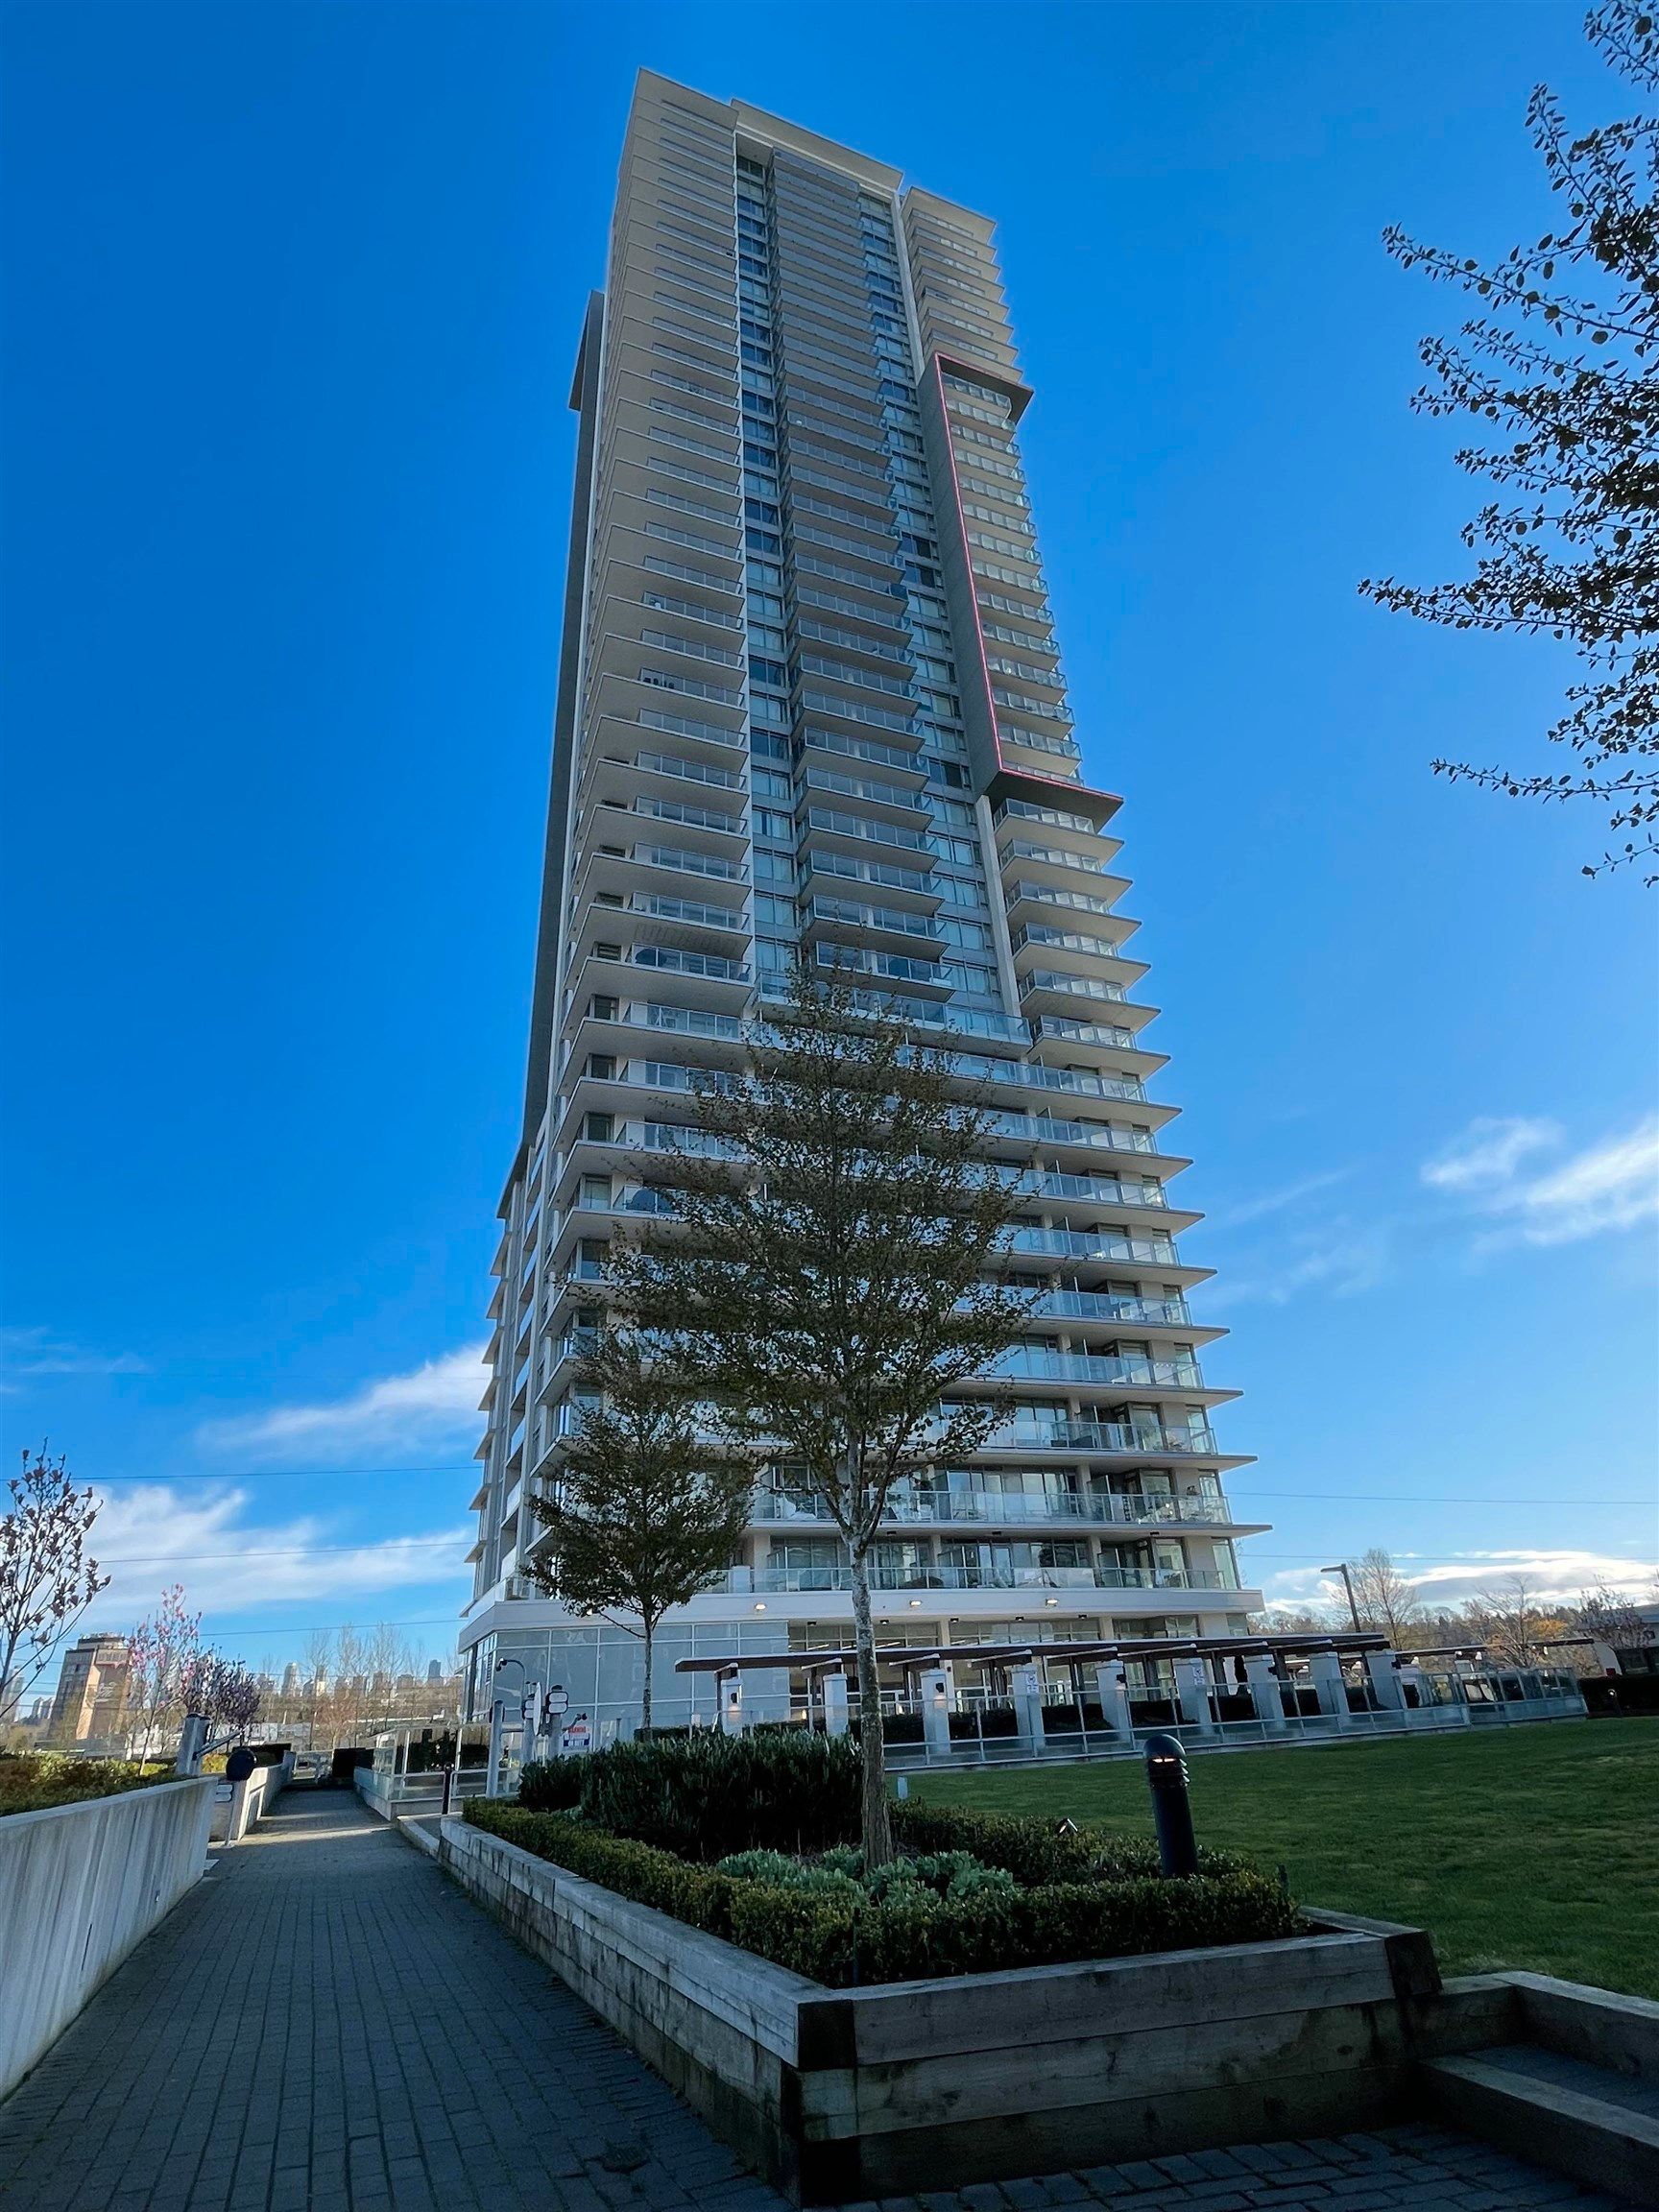 Main Photo: 2902 2388 MADISON AVENUE in Burnaby: Brentwood Park Condo for sale (Burnaby North)  : MLS®# R2675718